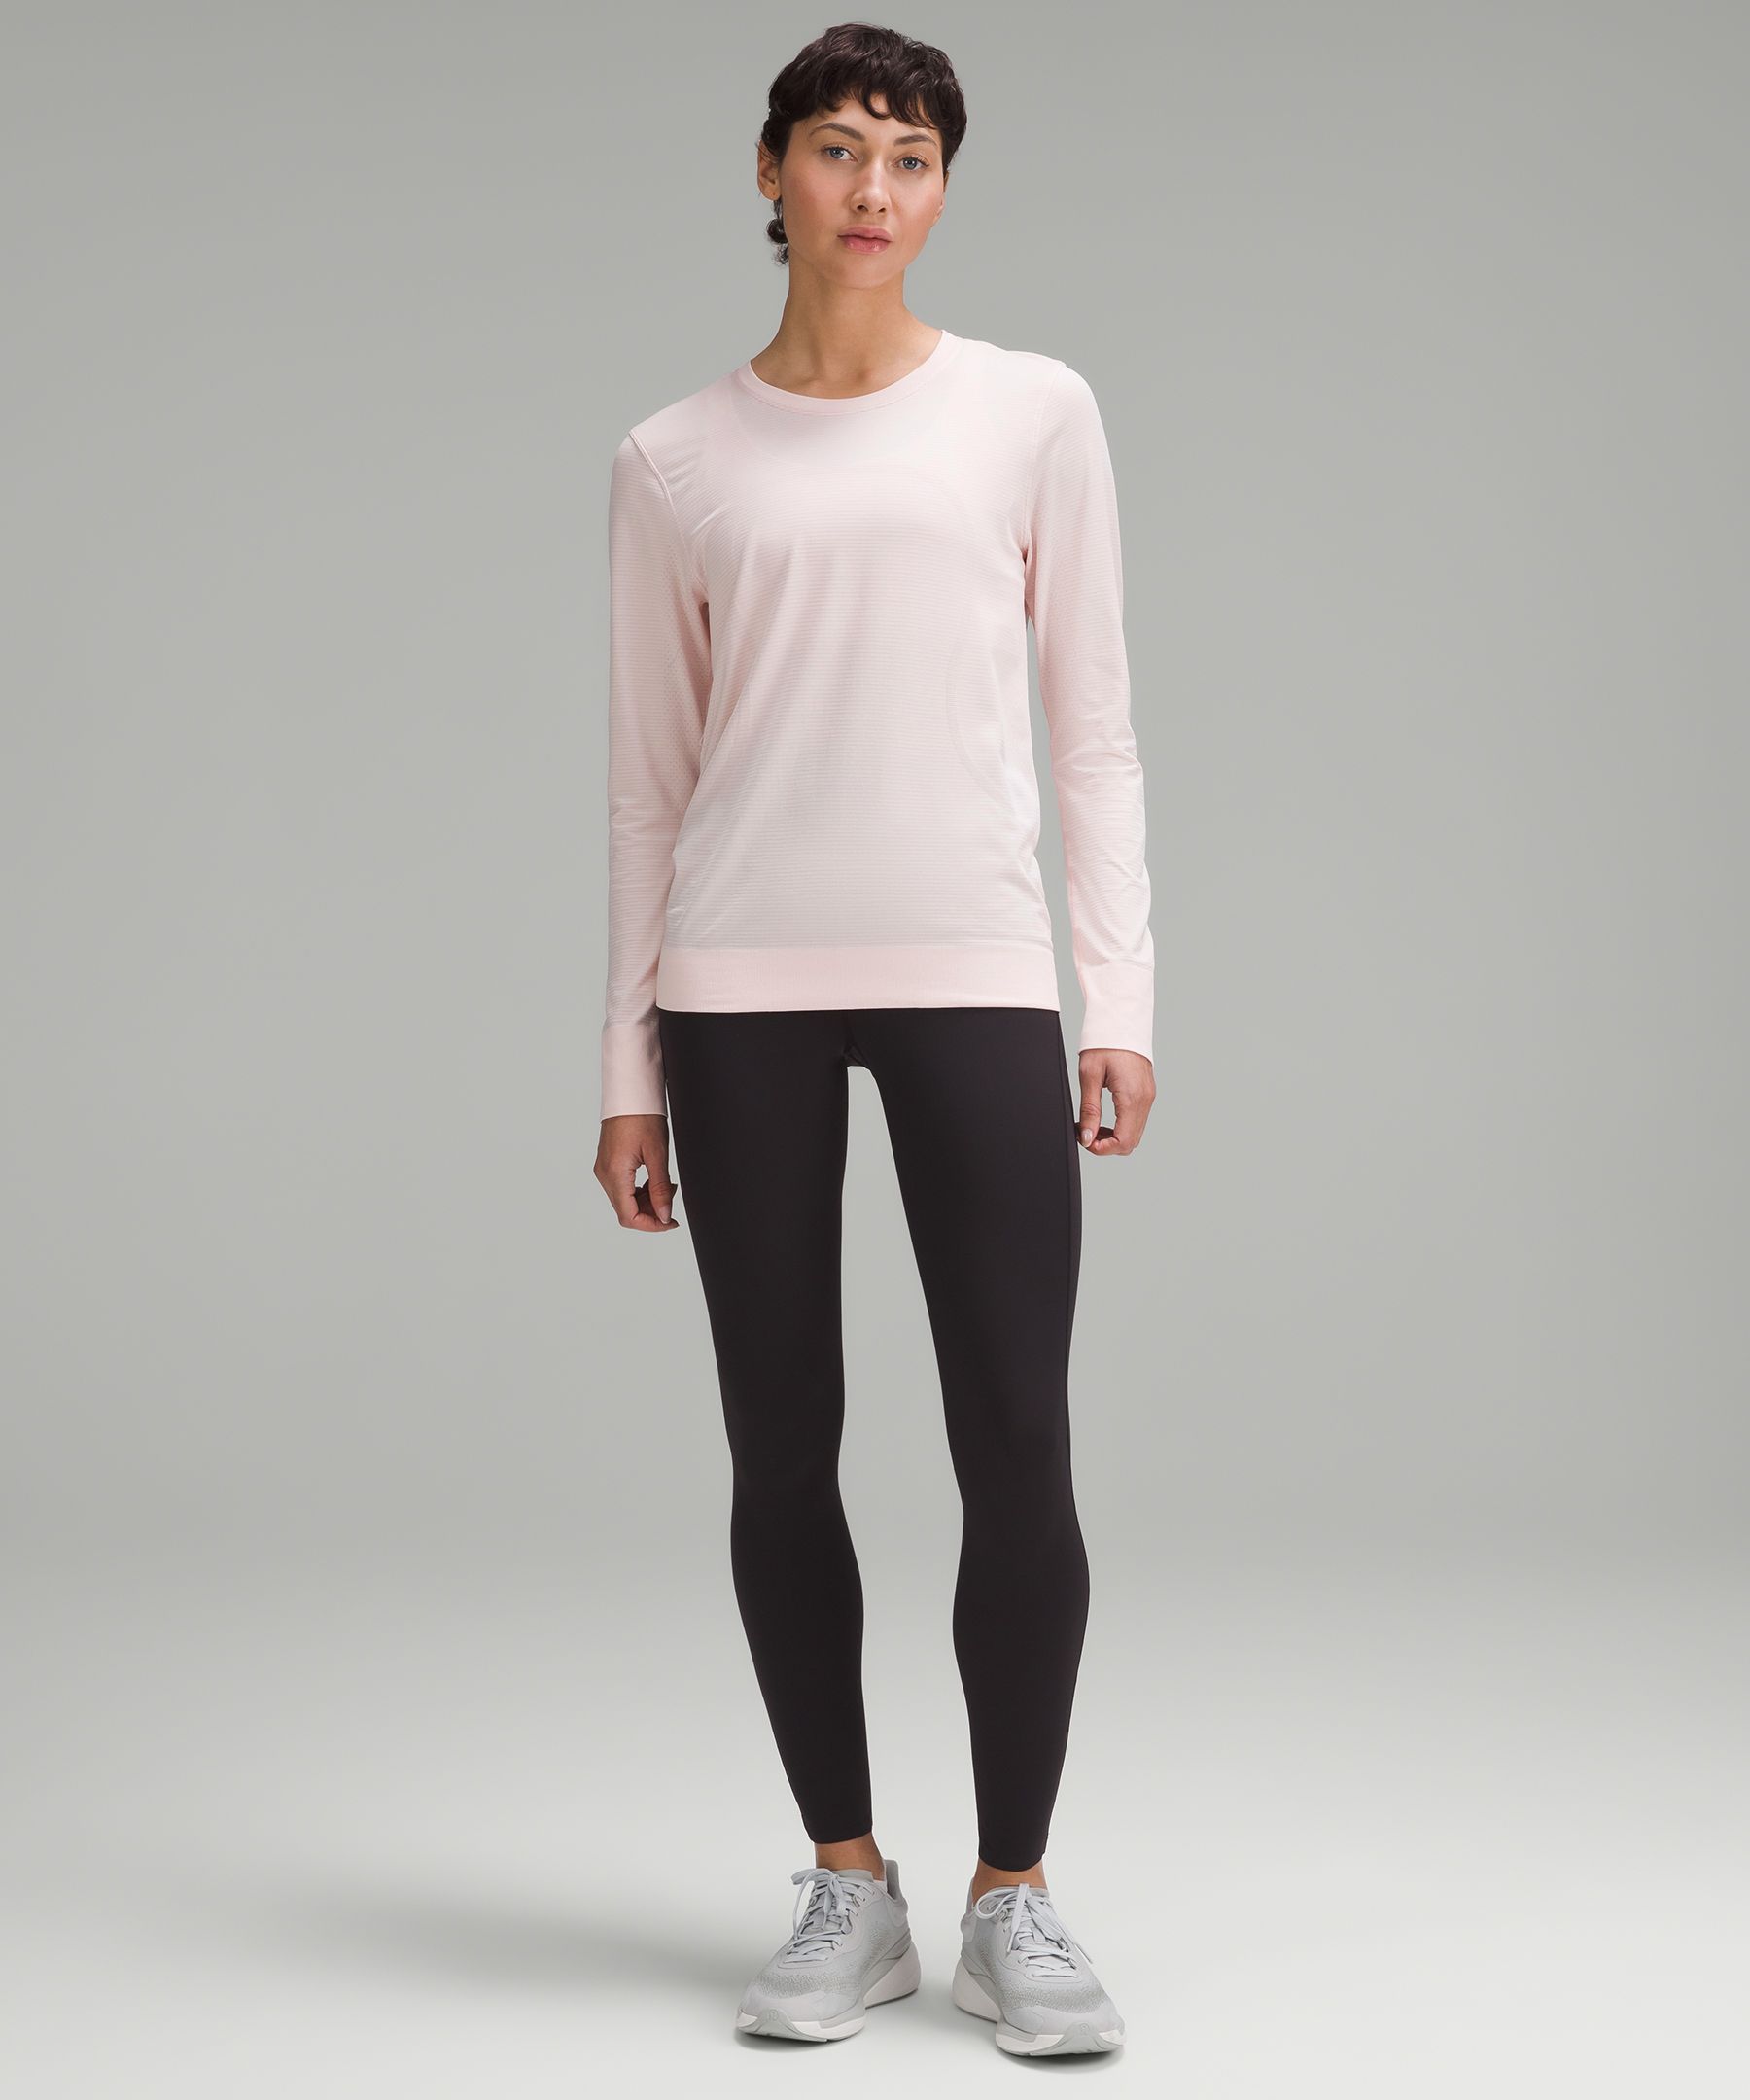 Lululemon Swiftly Tech Long Sleeve Crew *Sparkle Black / White / Silver 8  fitted